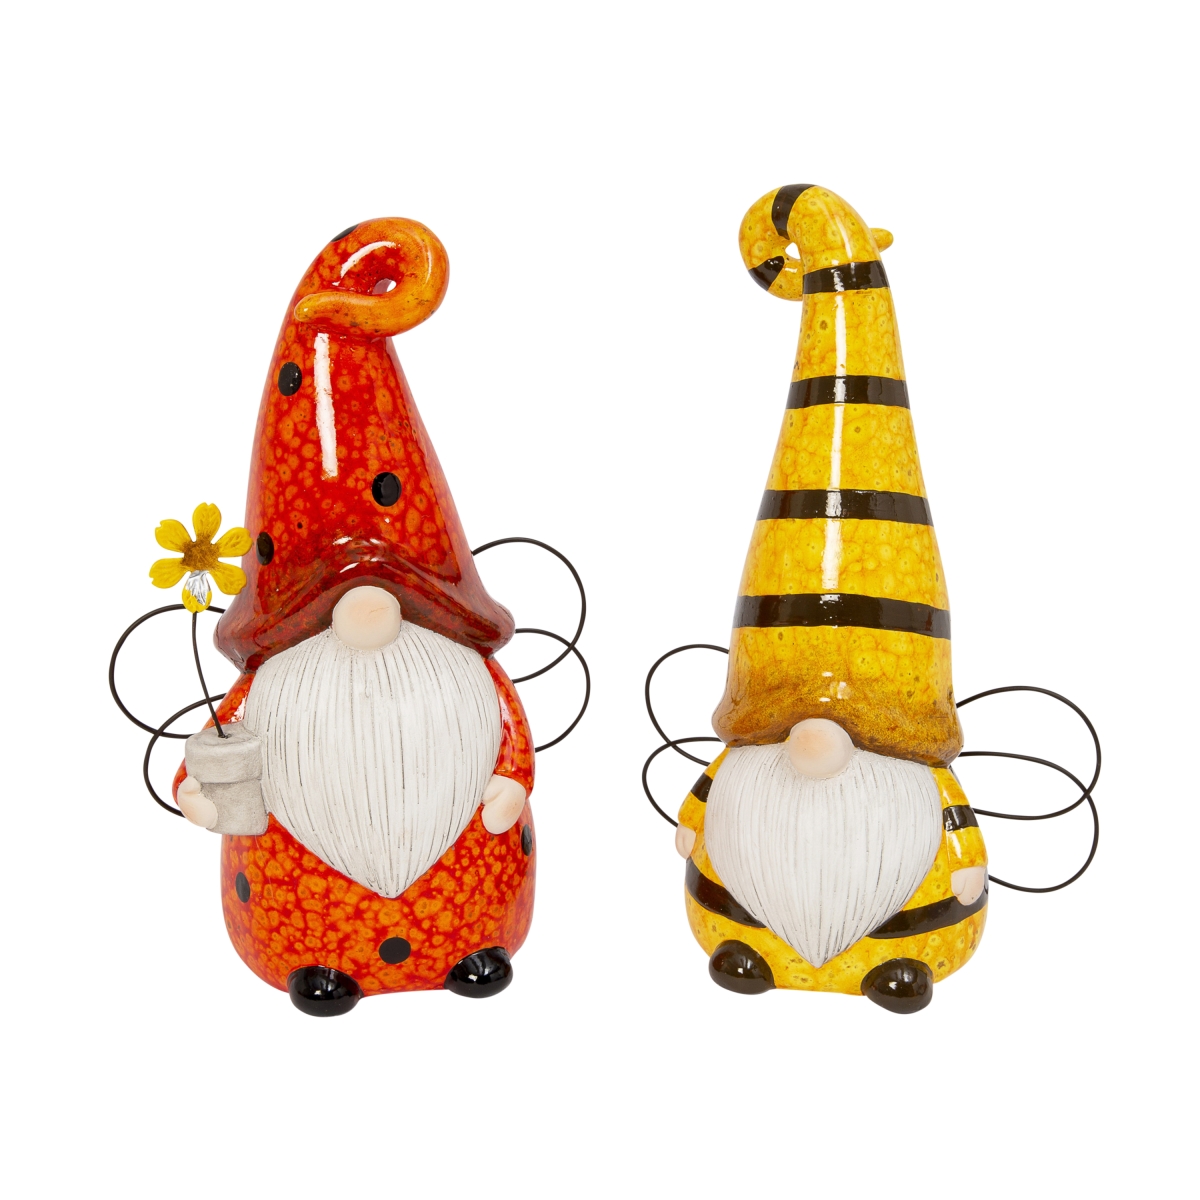 Picture of Gerson International 2577610EC 9.8 in. Terracotta Ladybug & Bee Gnome Figurines - Set of 2